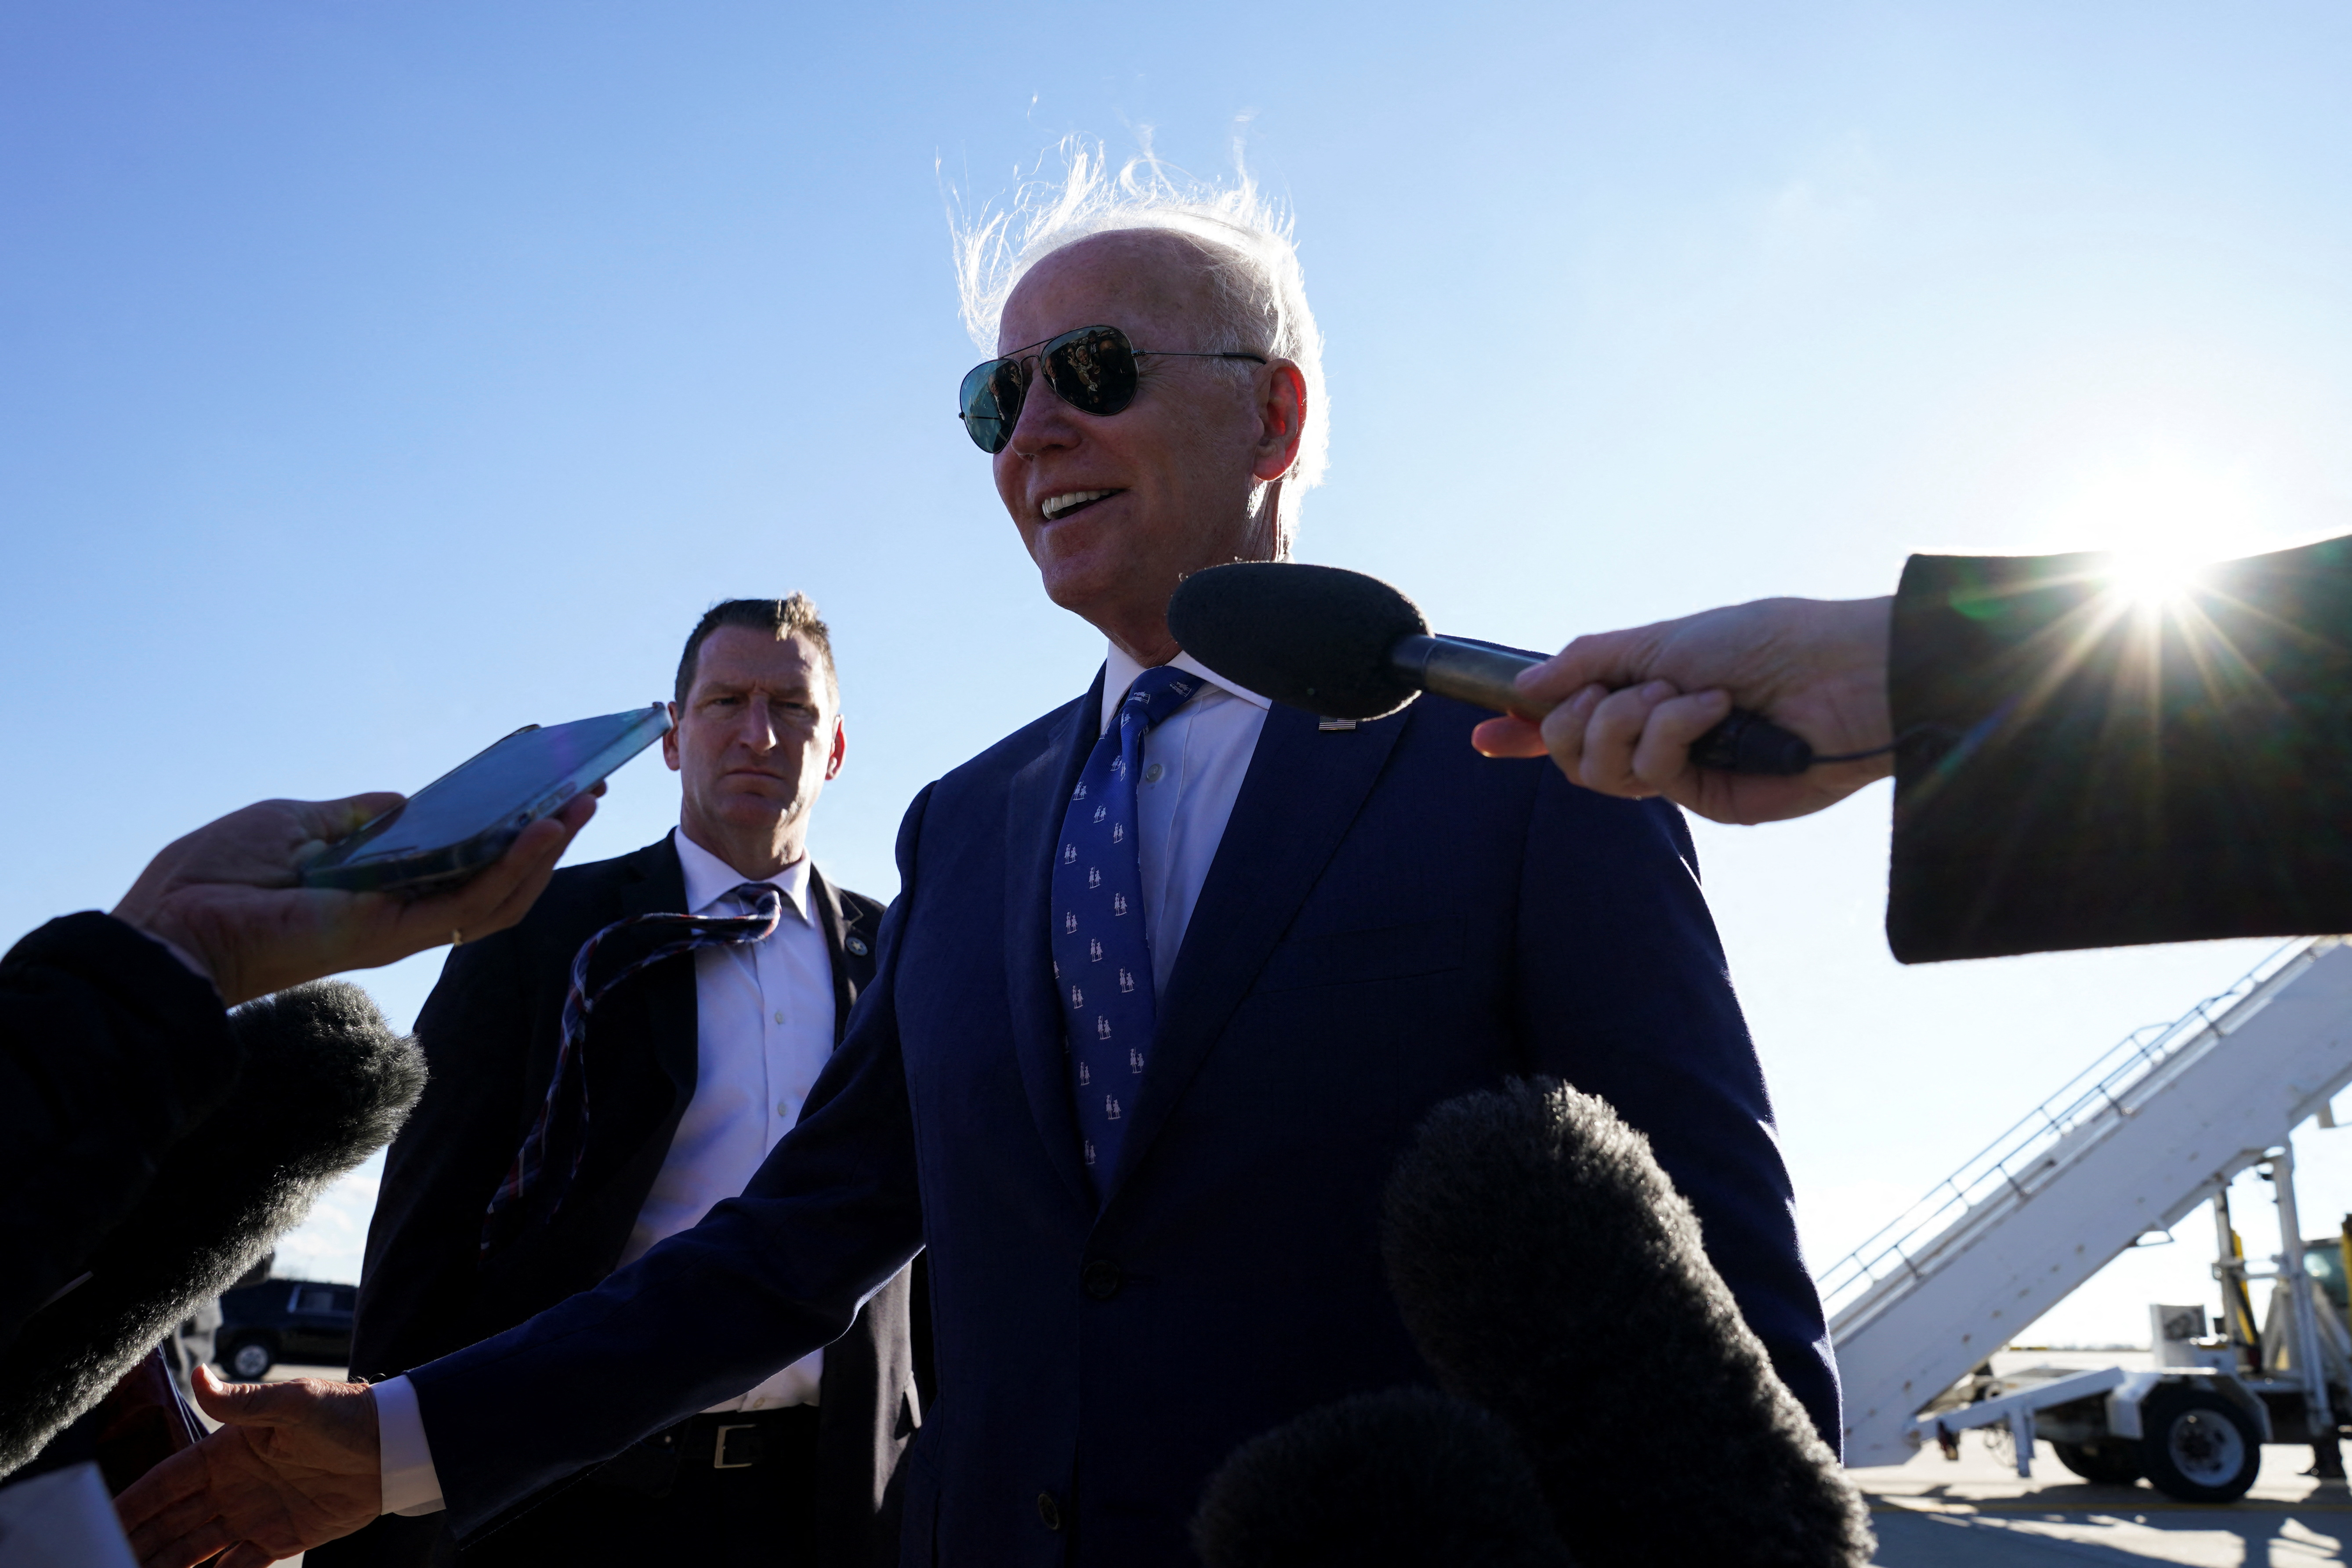 US President Joe Biden speaks to members of the media, following an event touting economic and infrastructure spending plans, as he departs, at the Cincinnati/Northern Kentucky International Airport, in Hebron, Kentucky, US, January 4, 2023. REUTERS/Kevin Lamarque